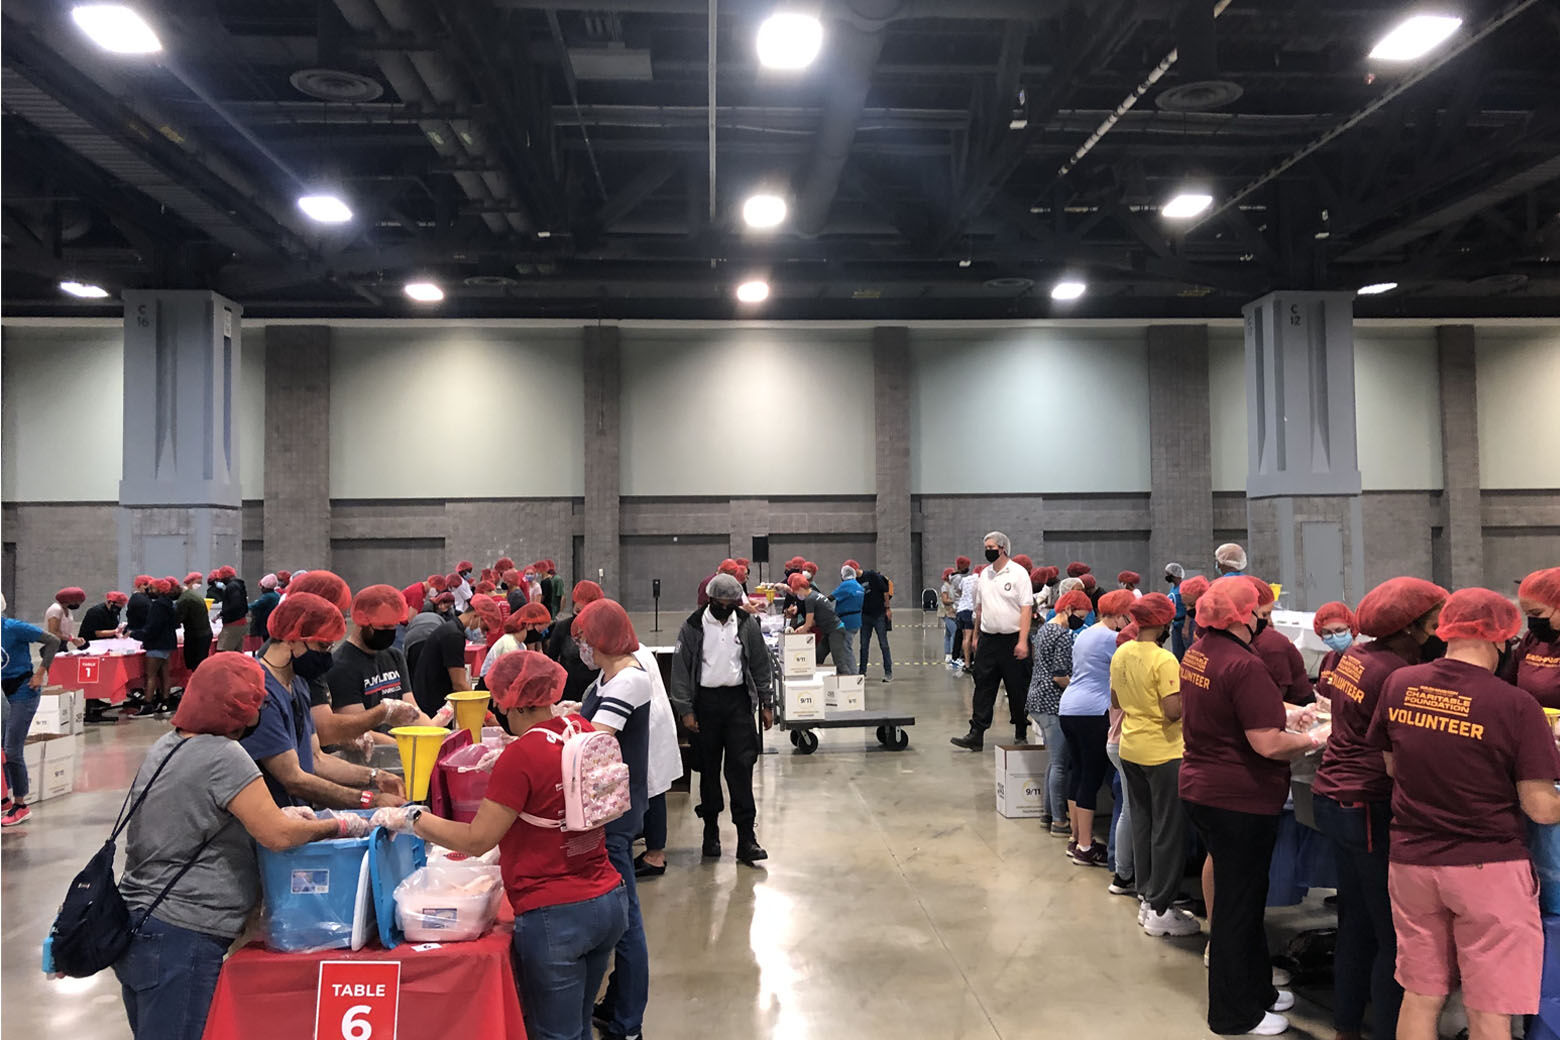 The volunteers stood elbow-to-elbow at long rows of banquet tables, their hands busy measuring, pouring, seasoning and packing as many as 200,000 meals.(WTOP/Dick Uliano)